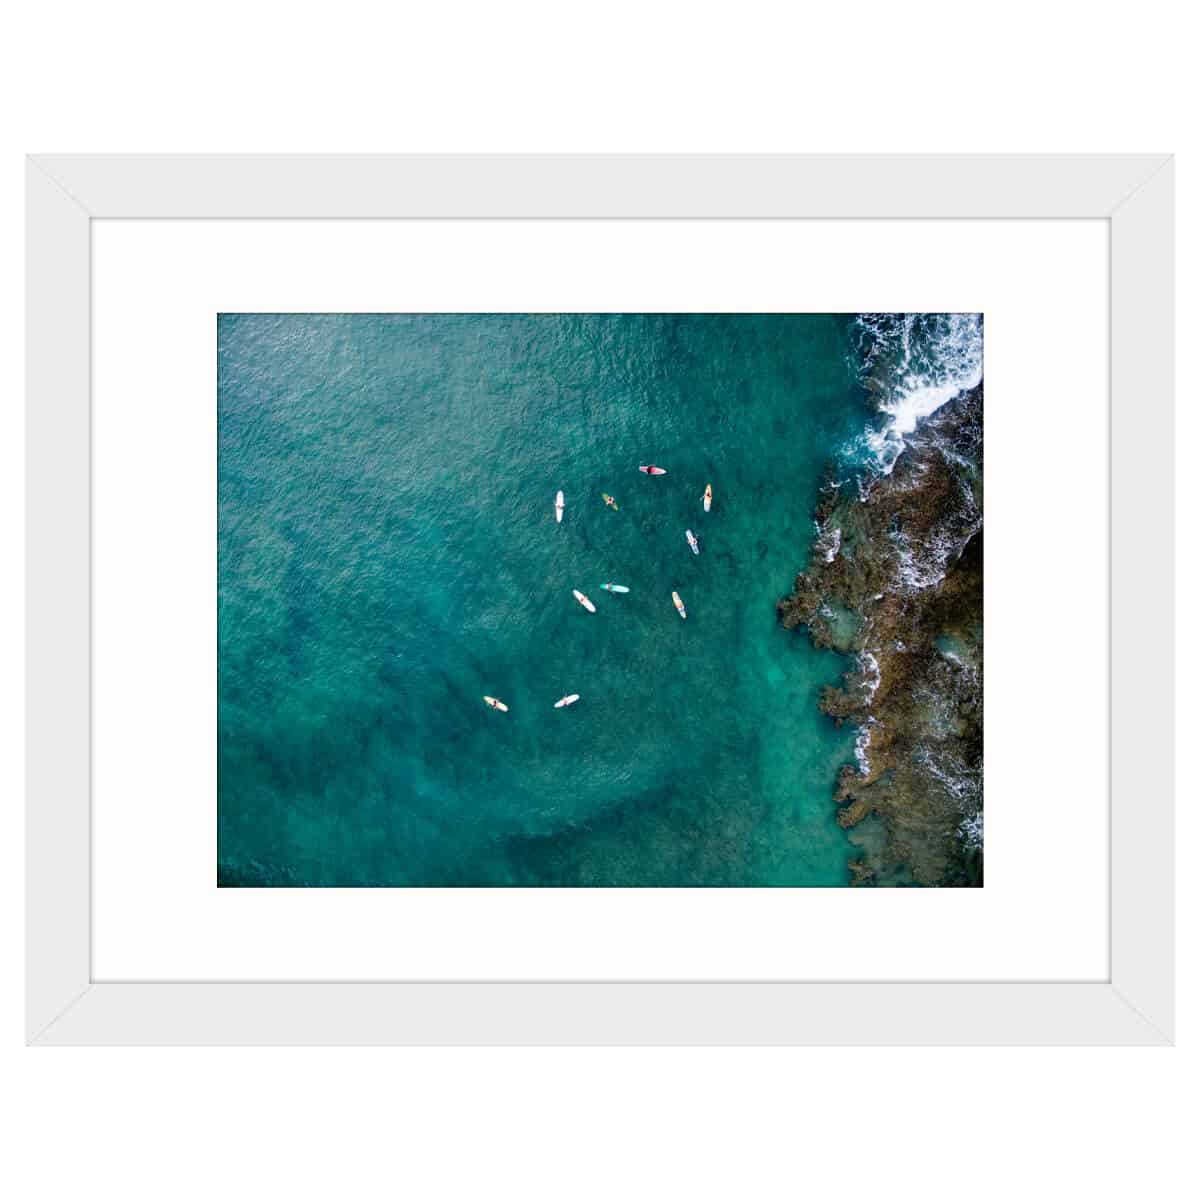 turtle bay bree poort matted white frame